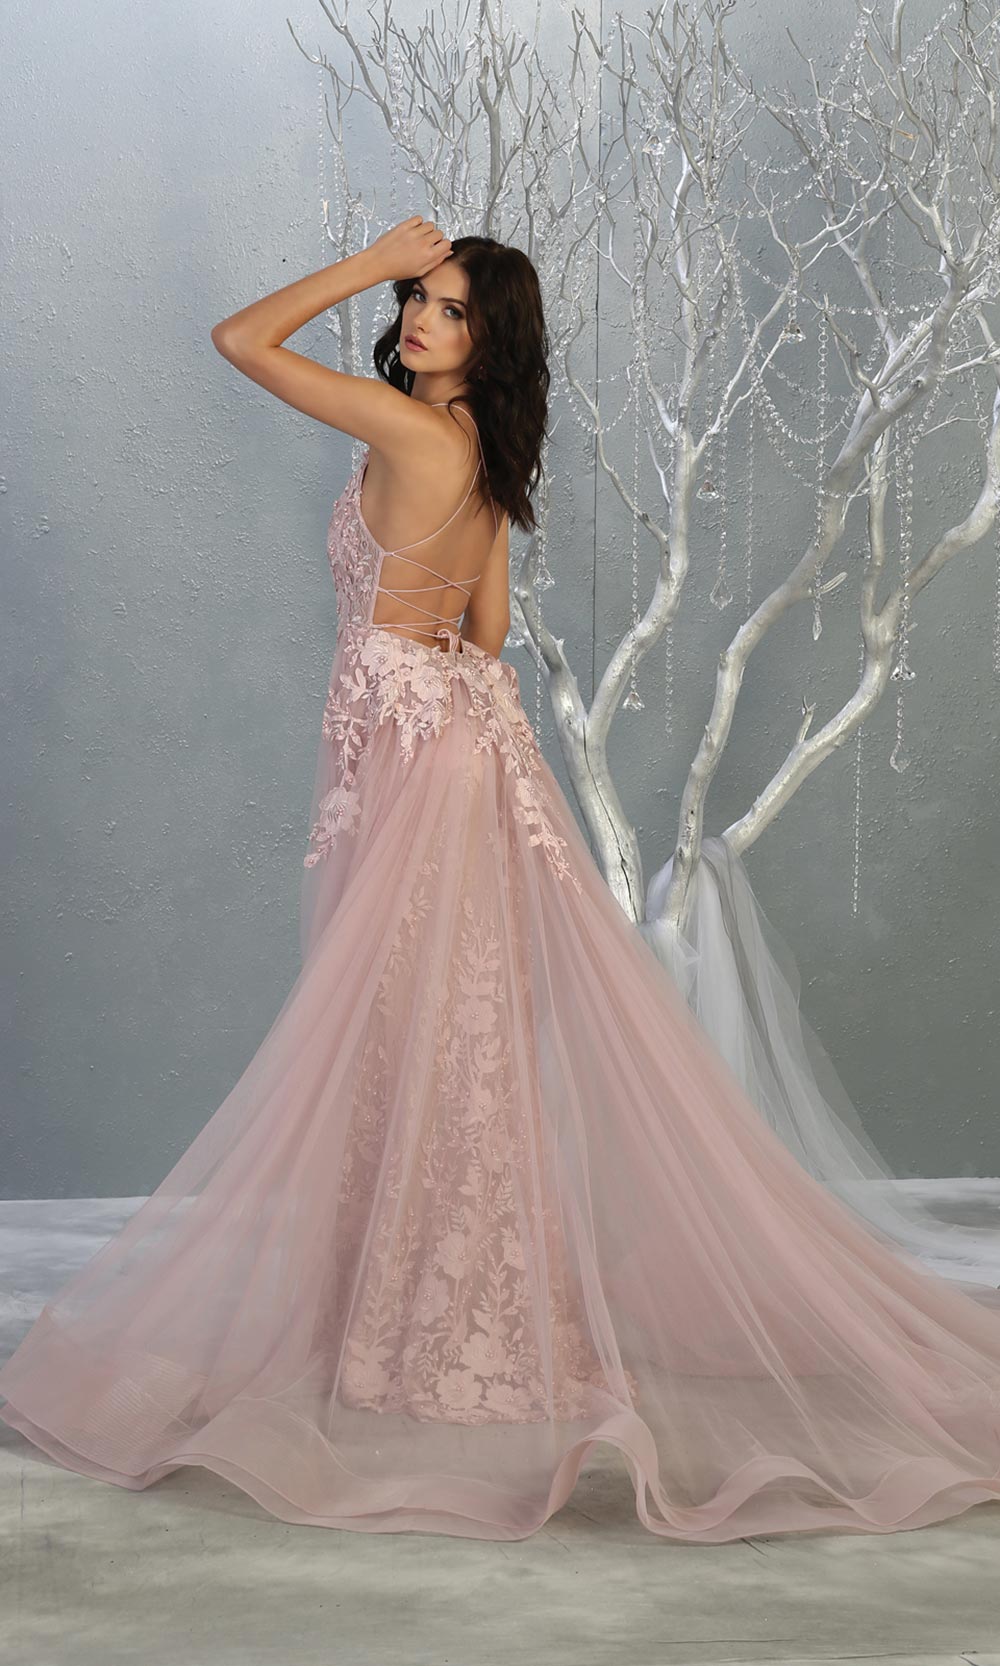 Mayqueen RQ7823 long mauve v neck evening fitted lace dress w/straps. Full length light pink gown is perfect for  enagagement/e-shoot dress, formal wedding guest, indowestern gown, evening party dress, prom, bridesmaid. Plus sizes avail-b.jpg